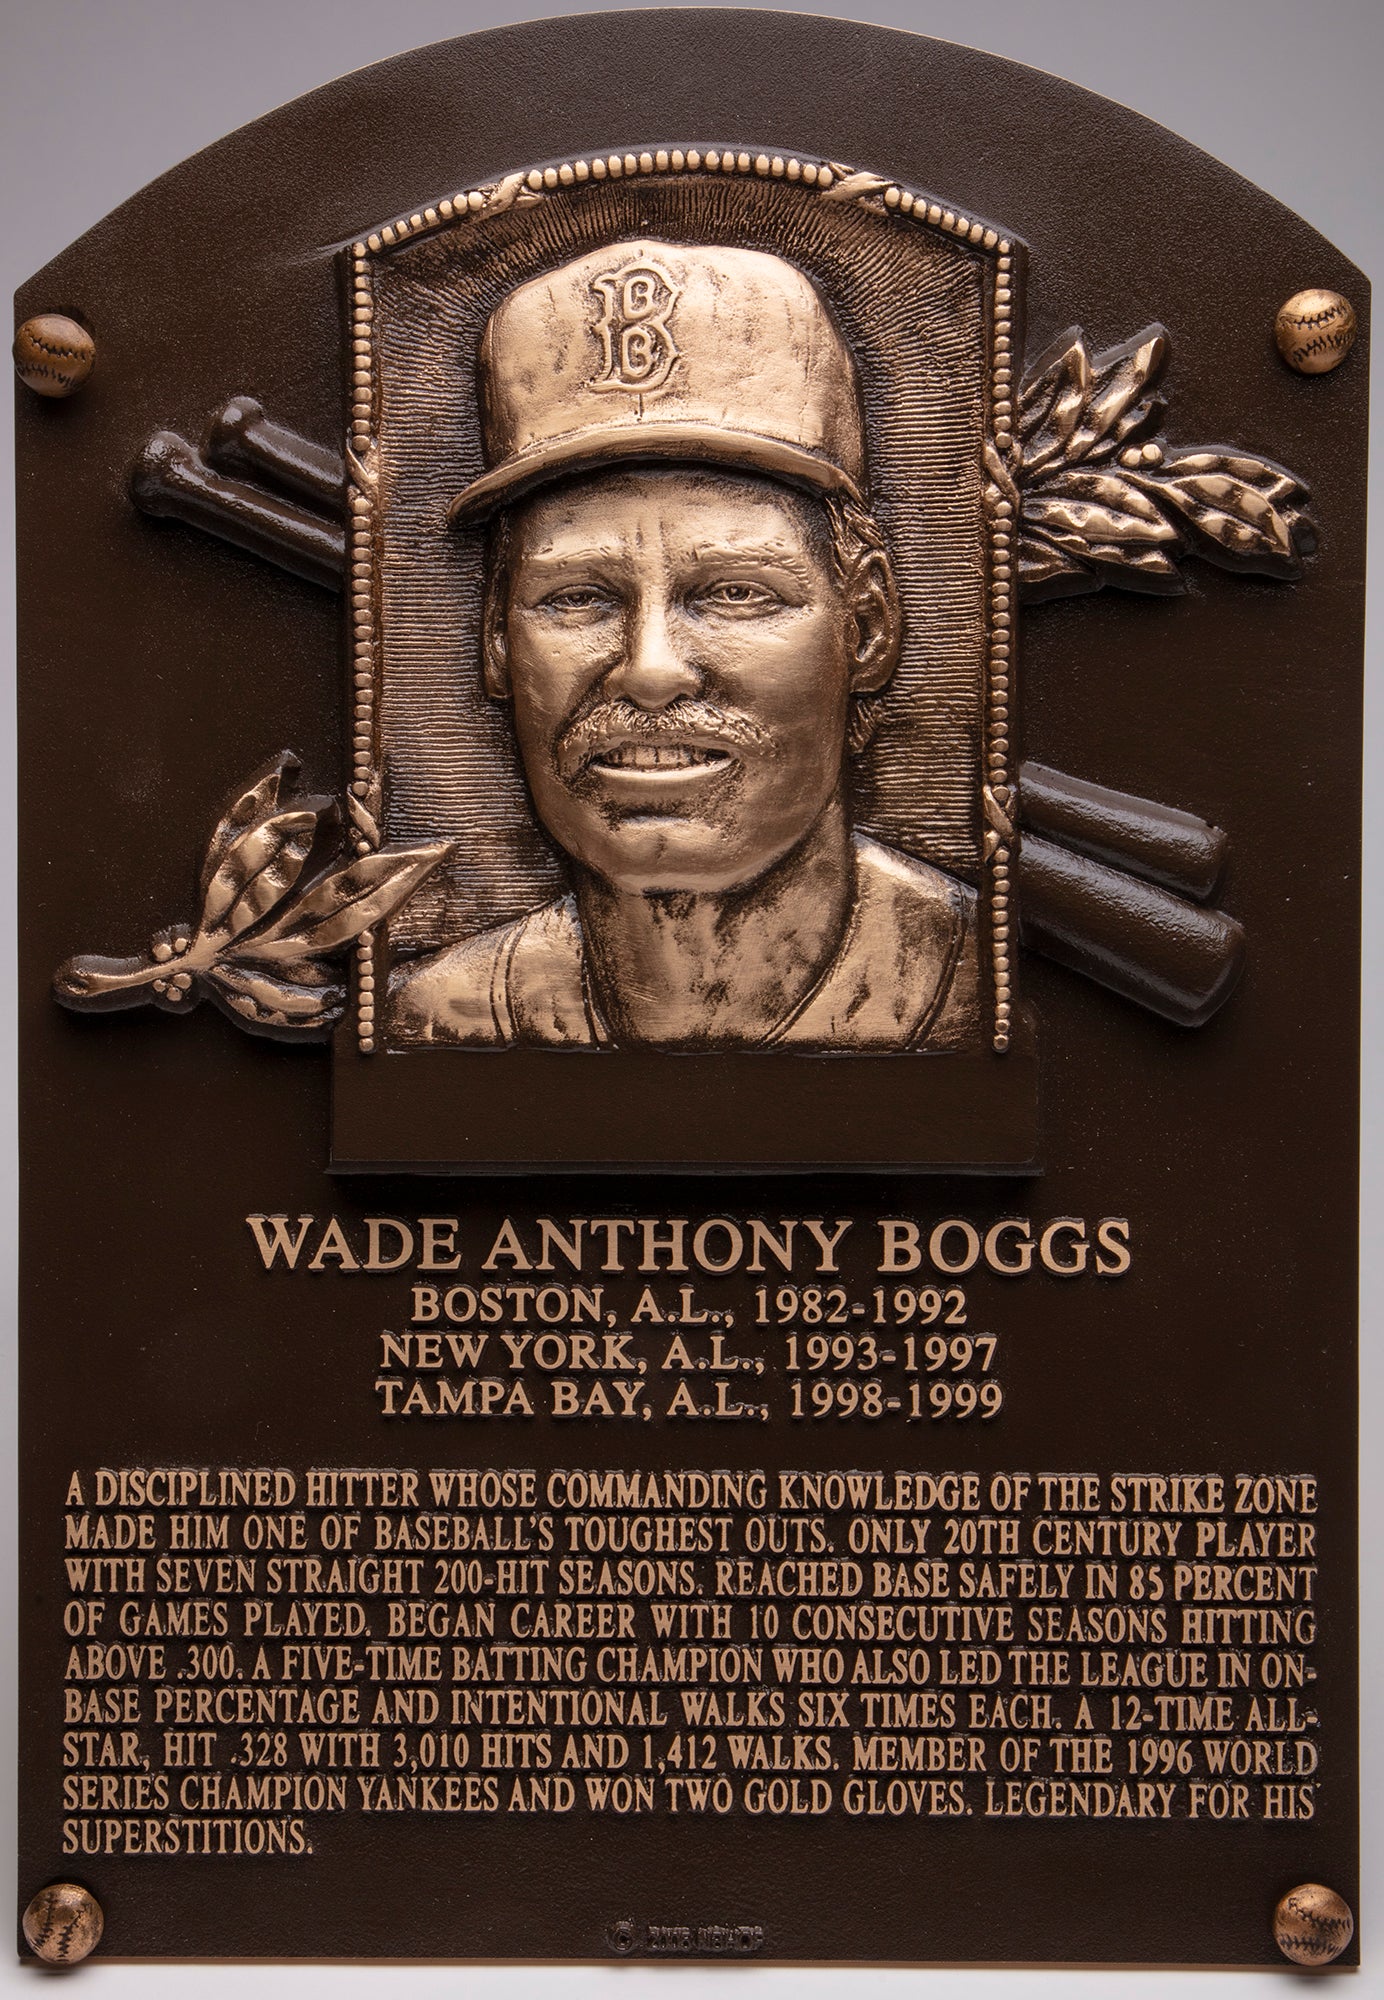 Wade Boggs Hall of Fame plaque